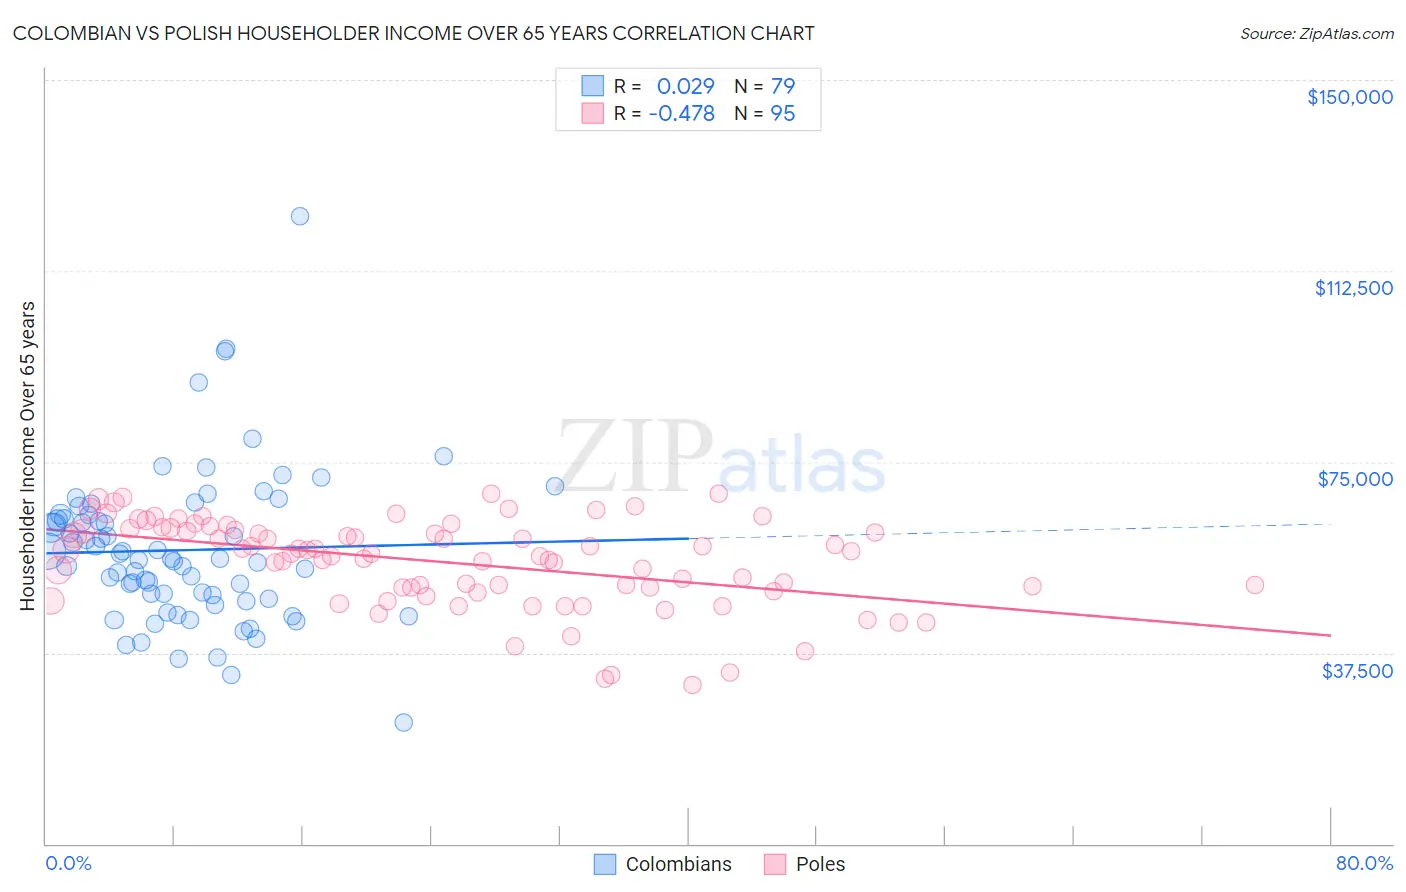 Colombian vs Polish Householder Income Over 65 years